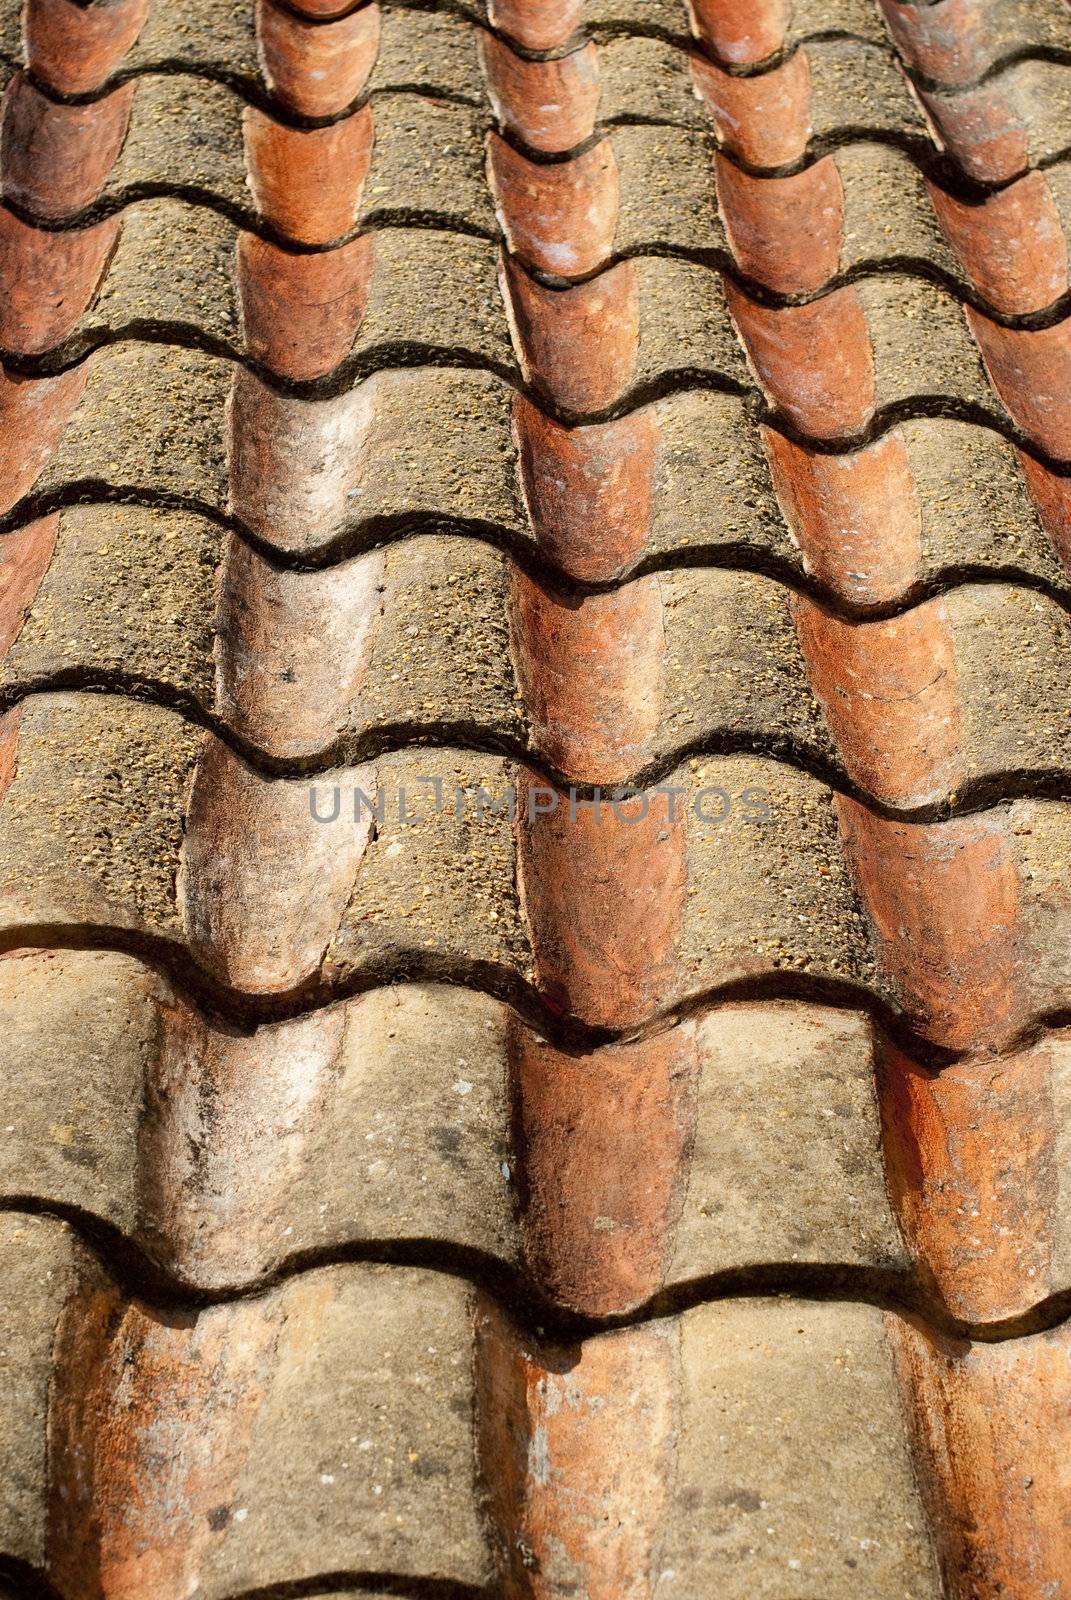 Part of a ceramic roof shot in perspective.